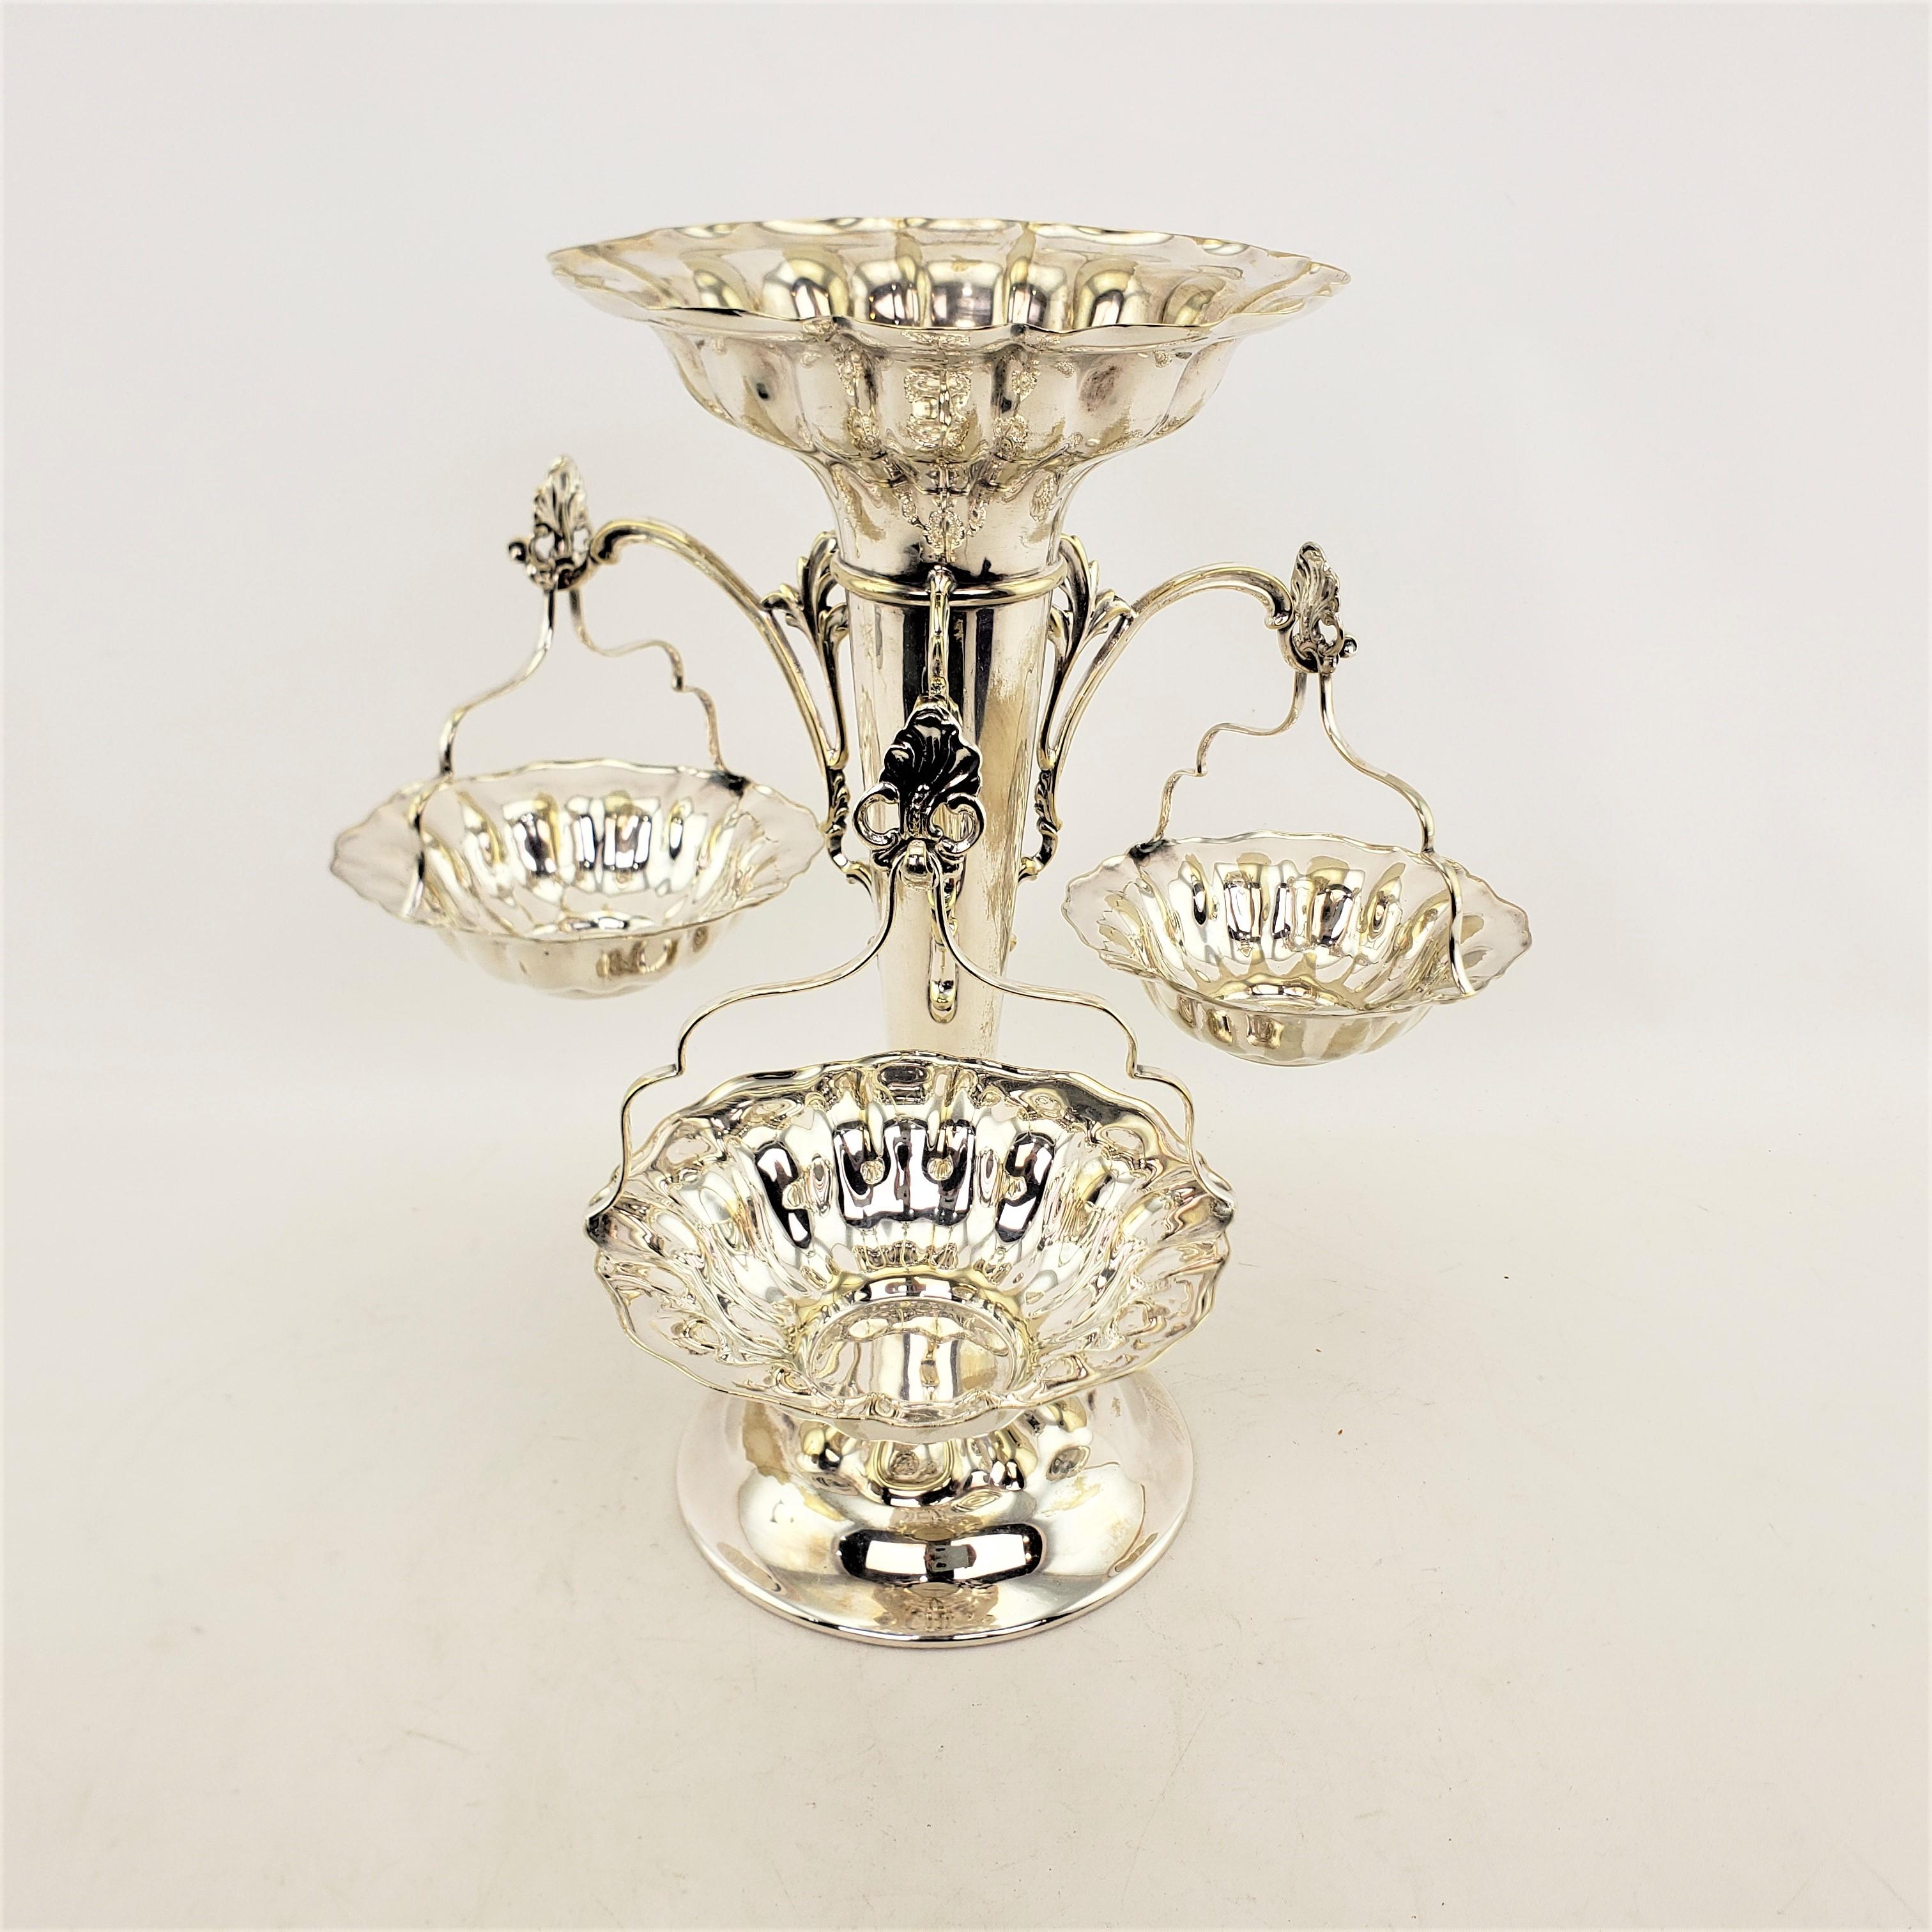 Antique English Elkington Silver Plated Epergne or Centerpiece with Side Baskets In Good Condition For Sale In Hamilton, Ontario